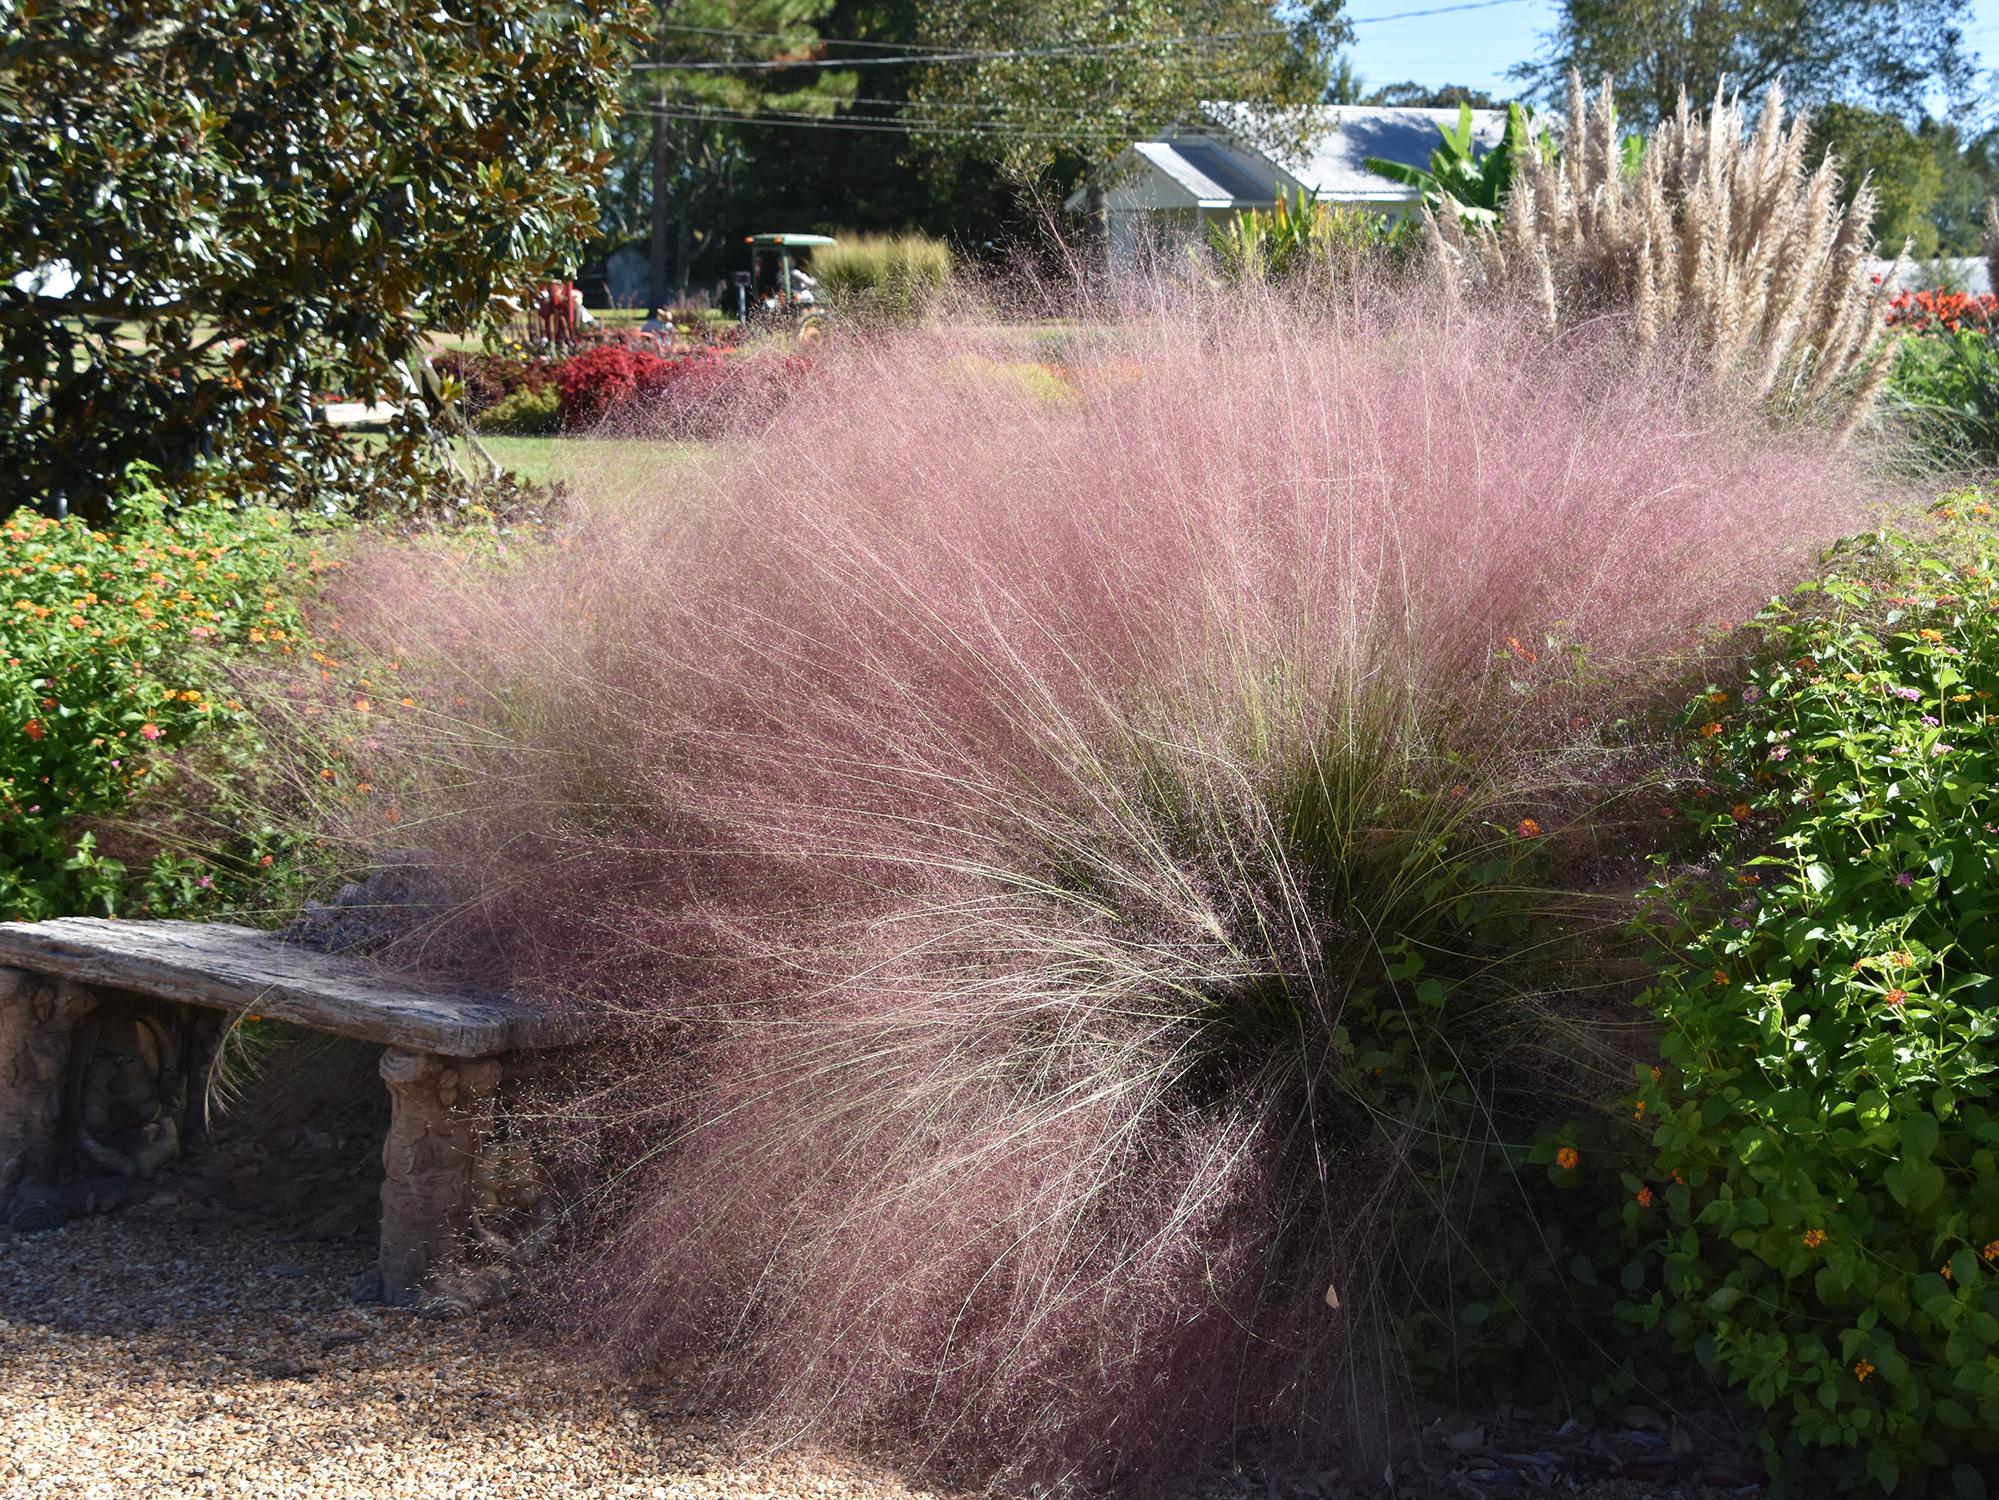 A mass of pink grasses billows beside a stone bench in a garden with greenery all around.